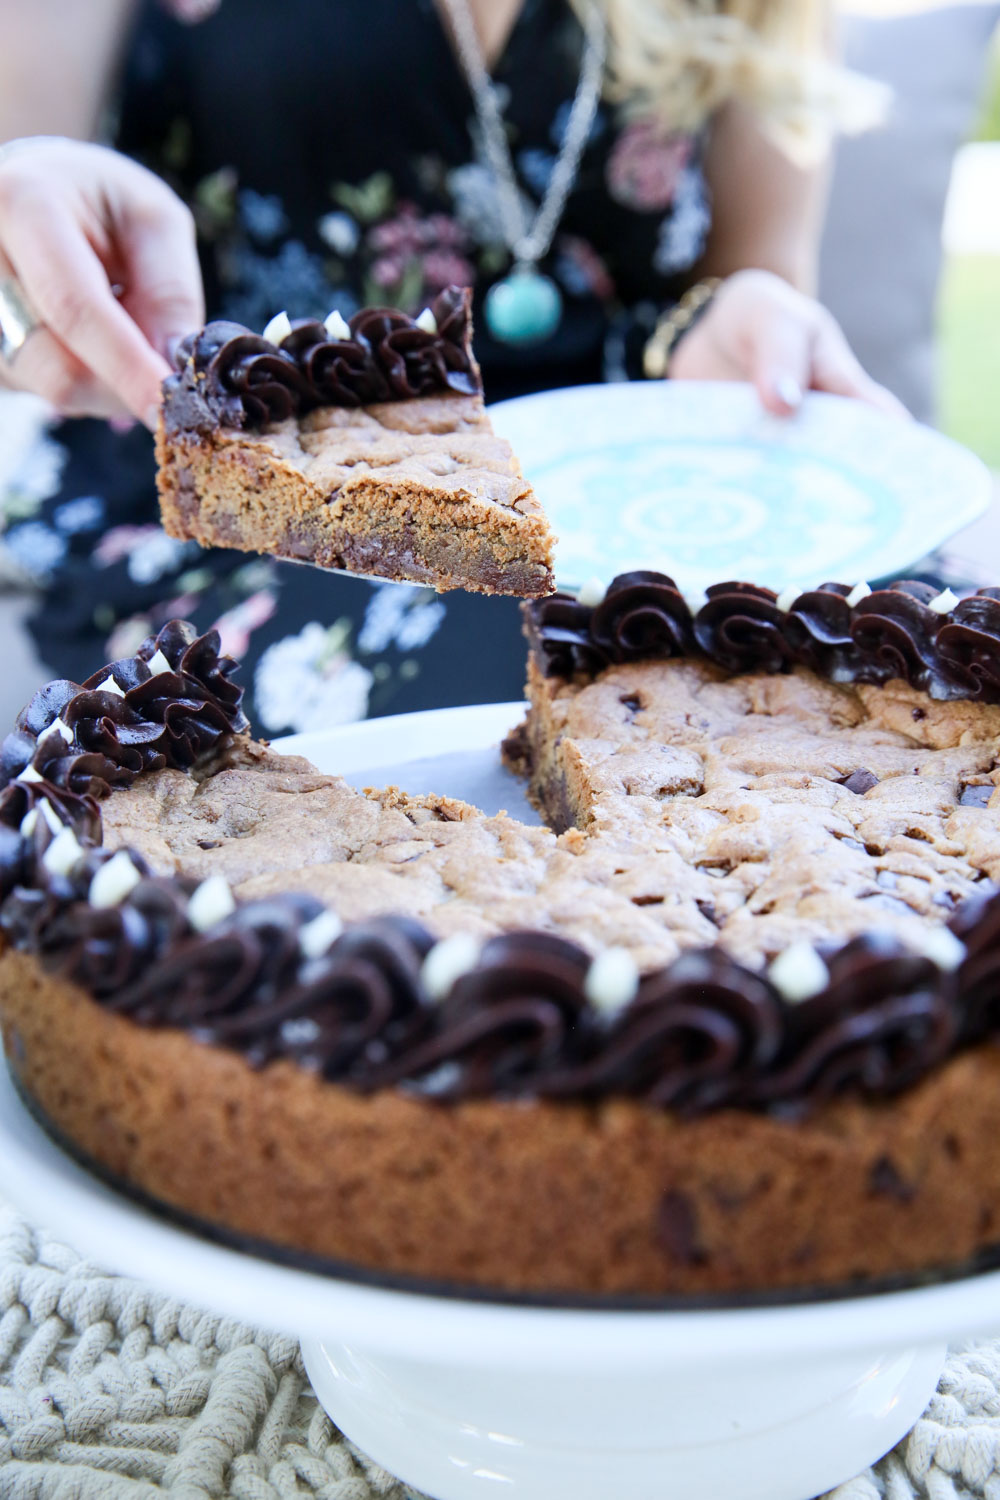 Serving Cookie Cake with Chocolate Frosting